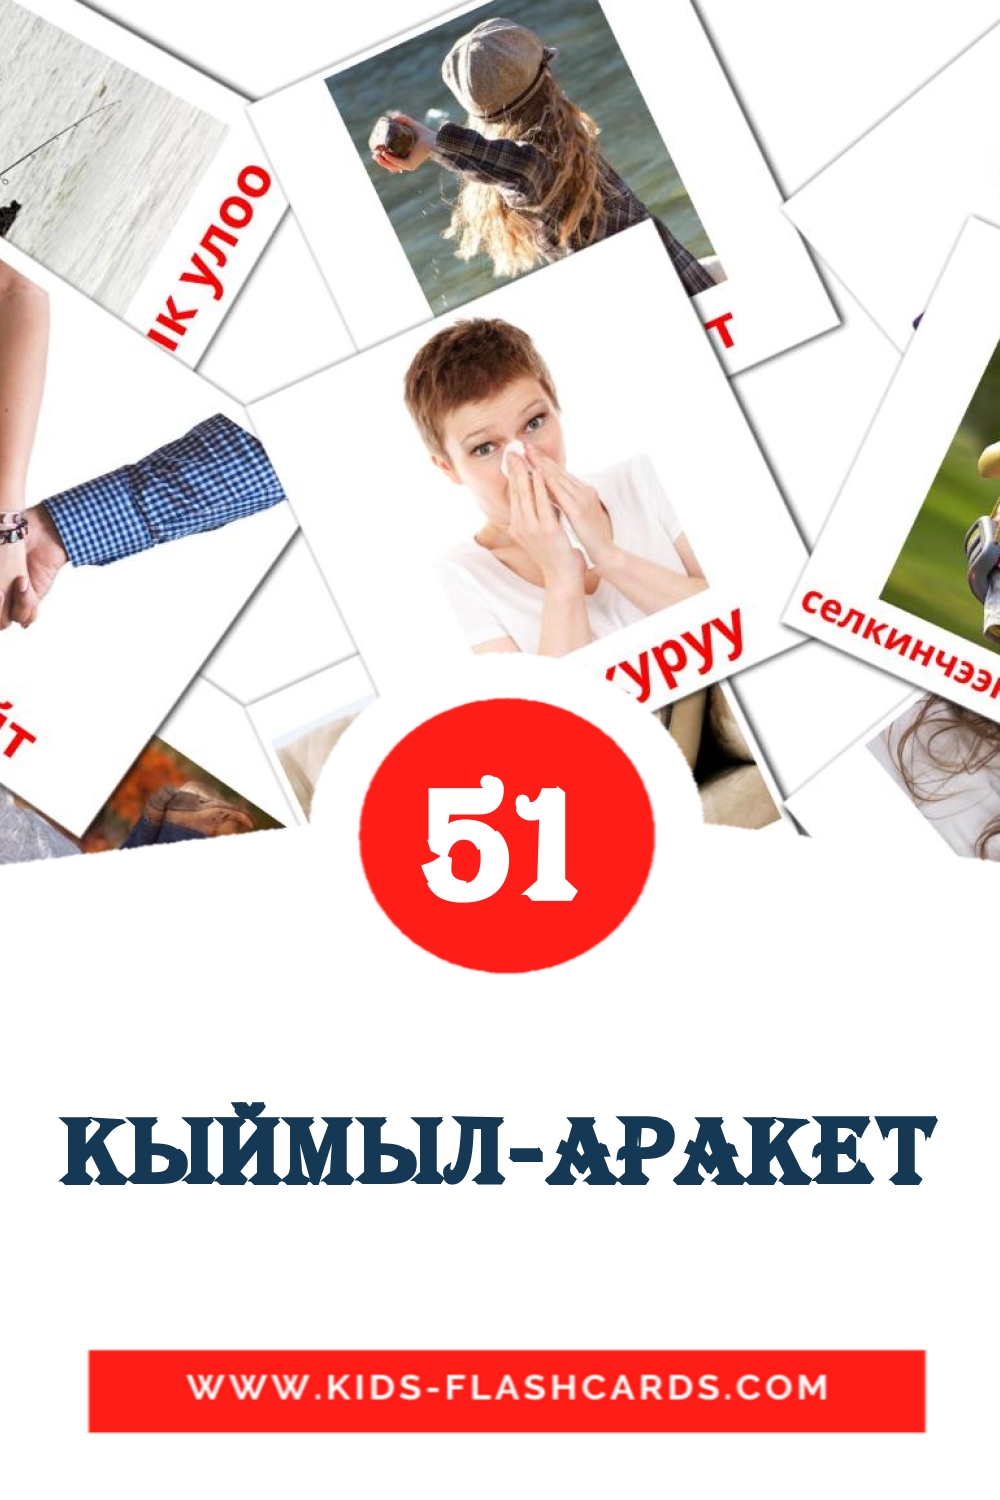 51 кыймыл-аракет Picture Cards for Kindergarden in kyrgyz